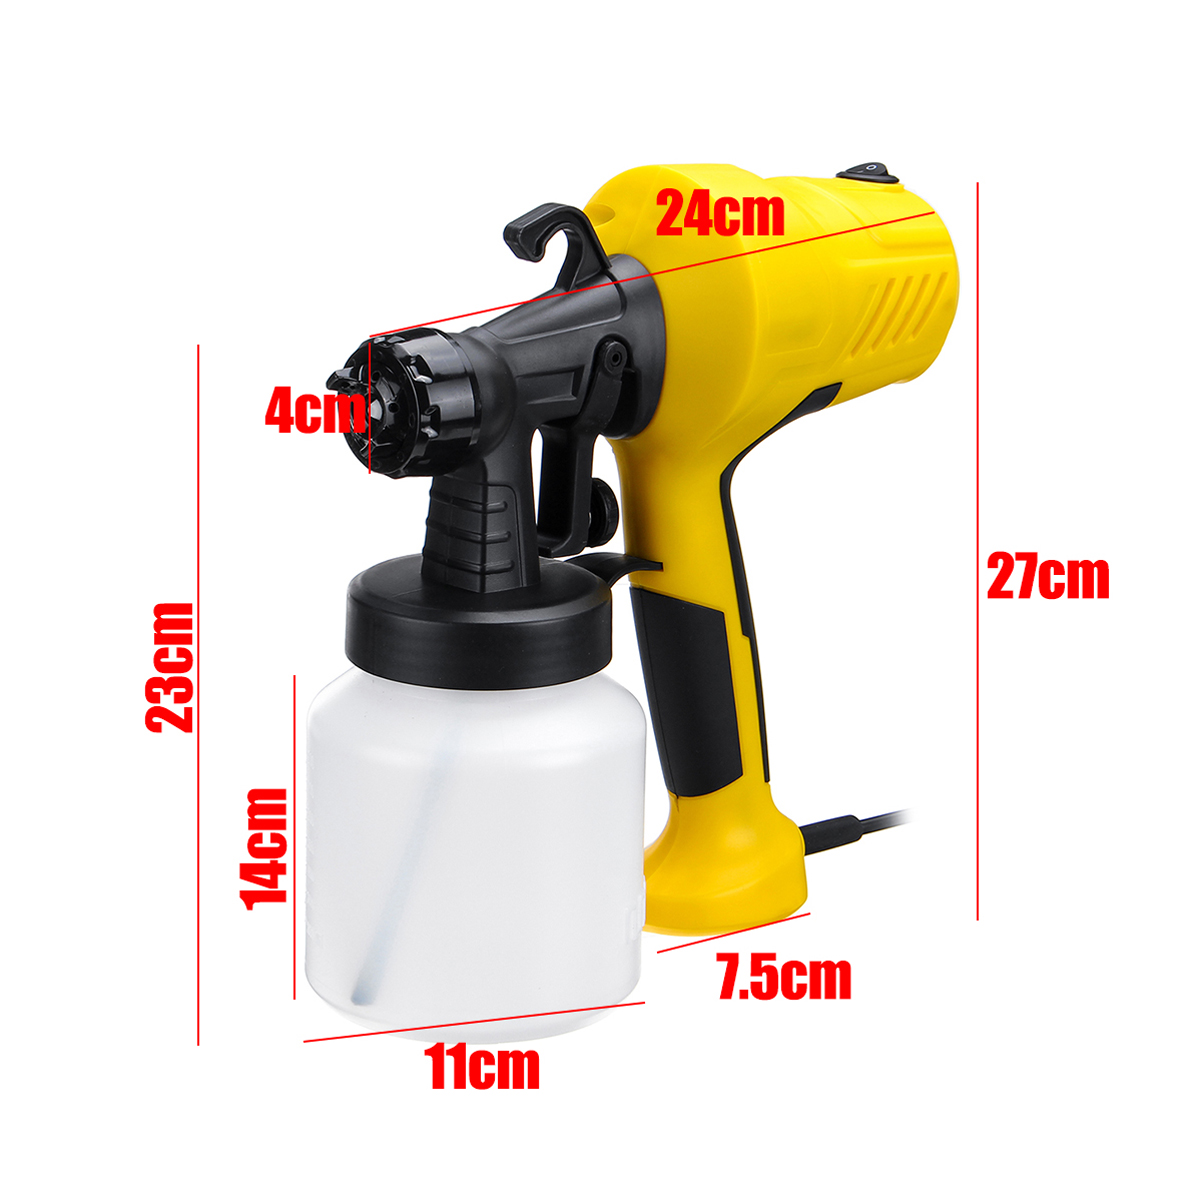 Electric-Spray-Paint-Sprayer-Compressor-for-Car-Wood-Wall-with-Flow-Control-1701162-9